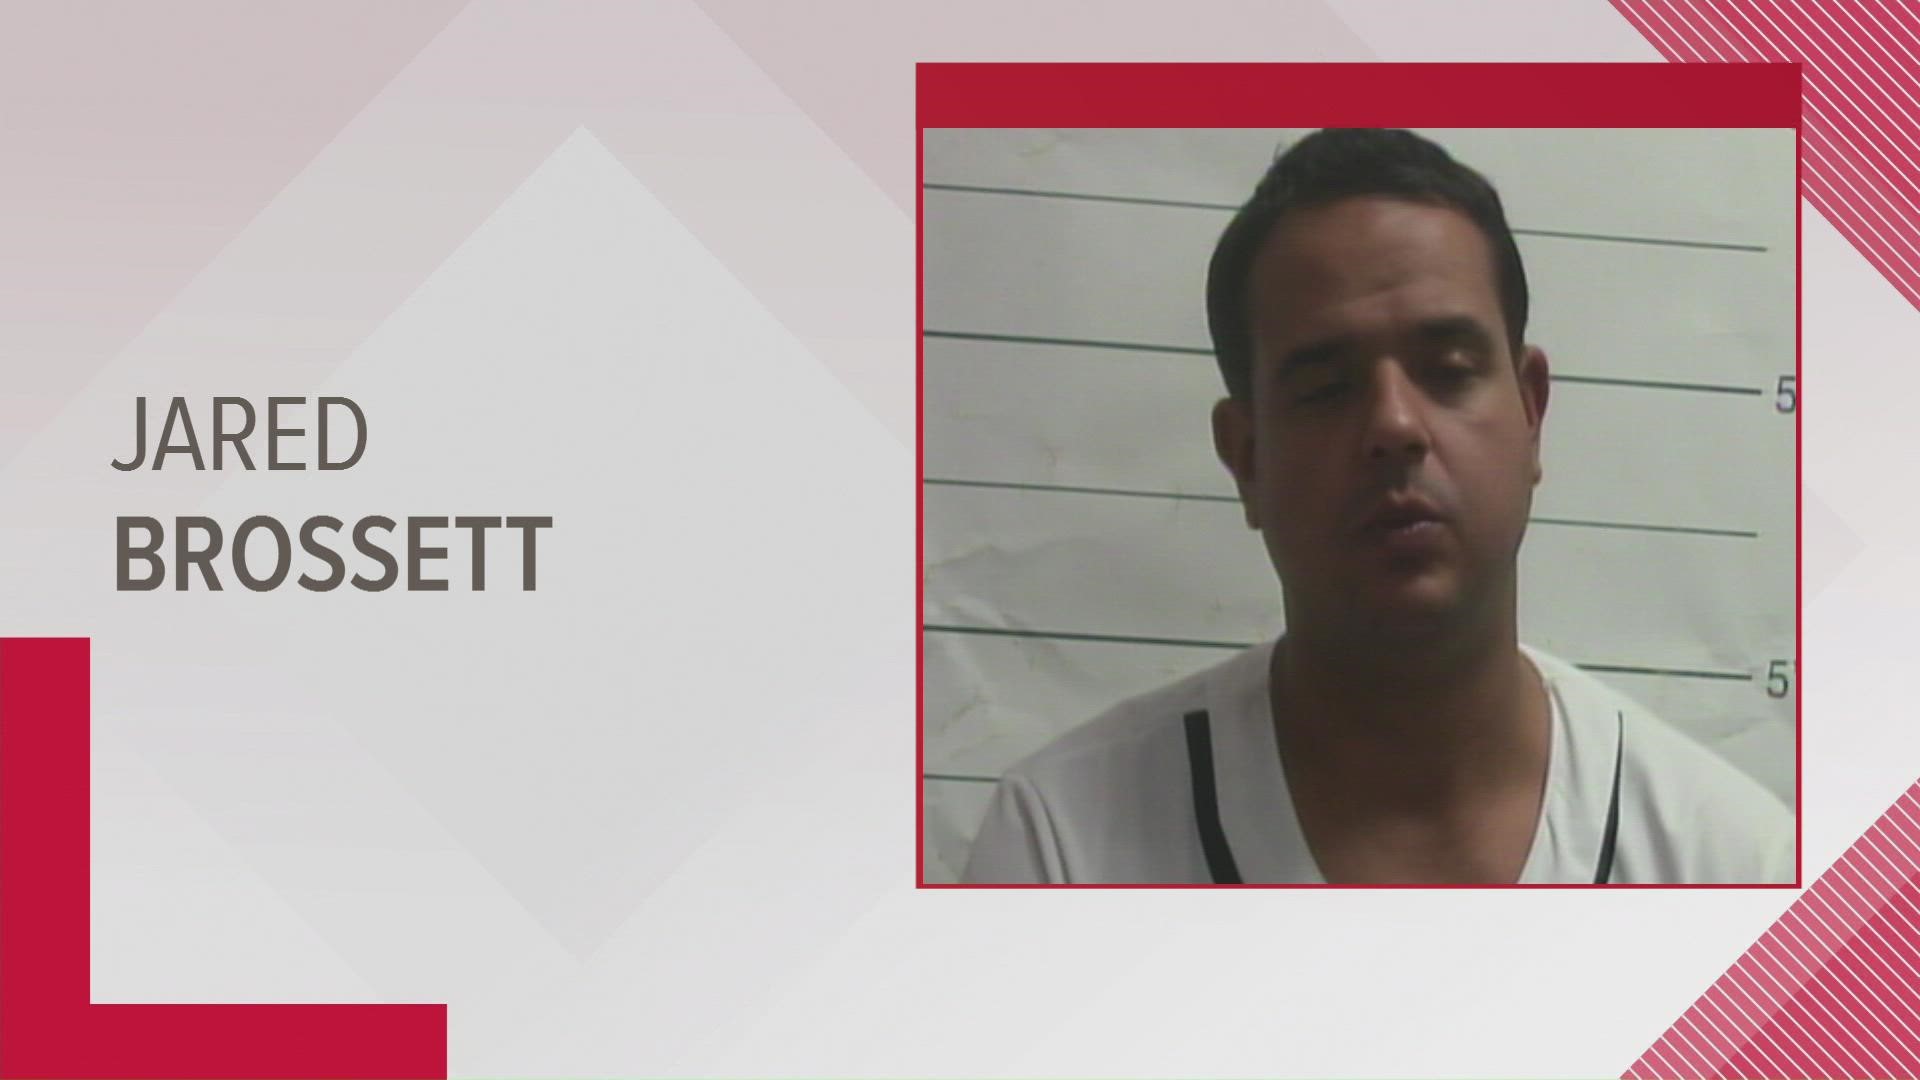 Brossett was booked on a charge of driving while drunk on Monday morning, according to Orleans Parish Sheriff's Office records.